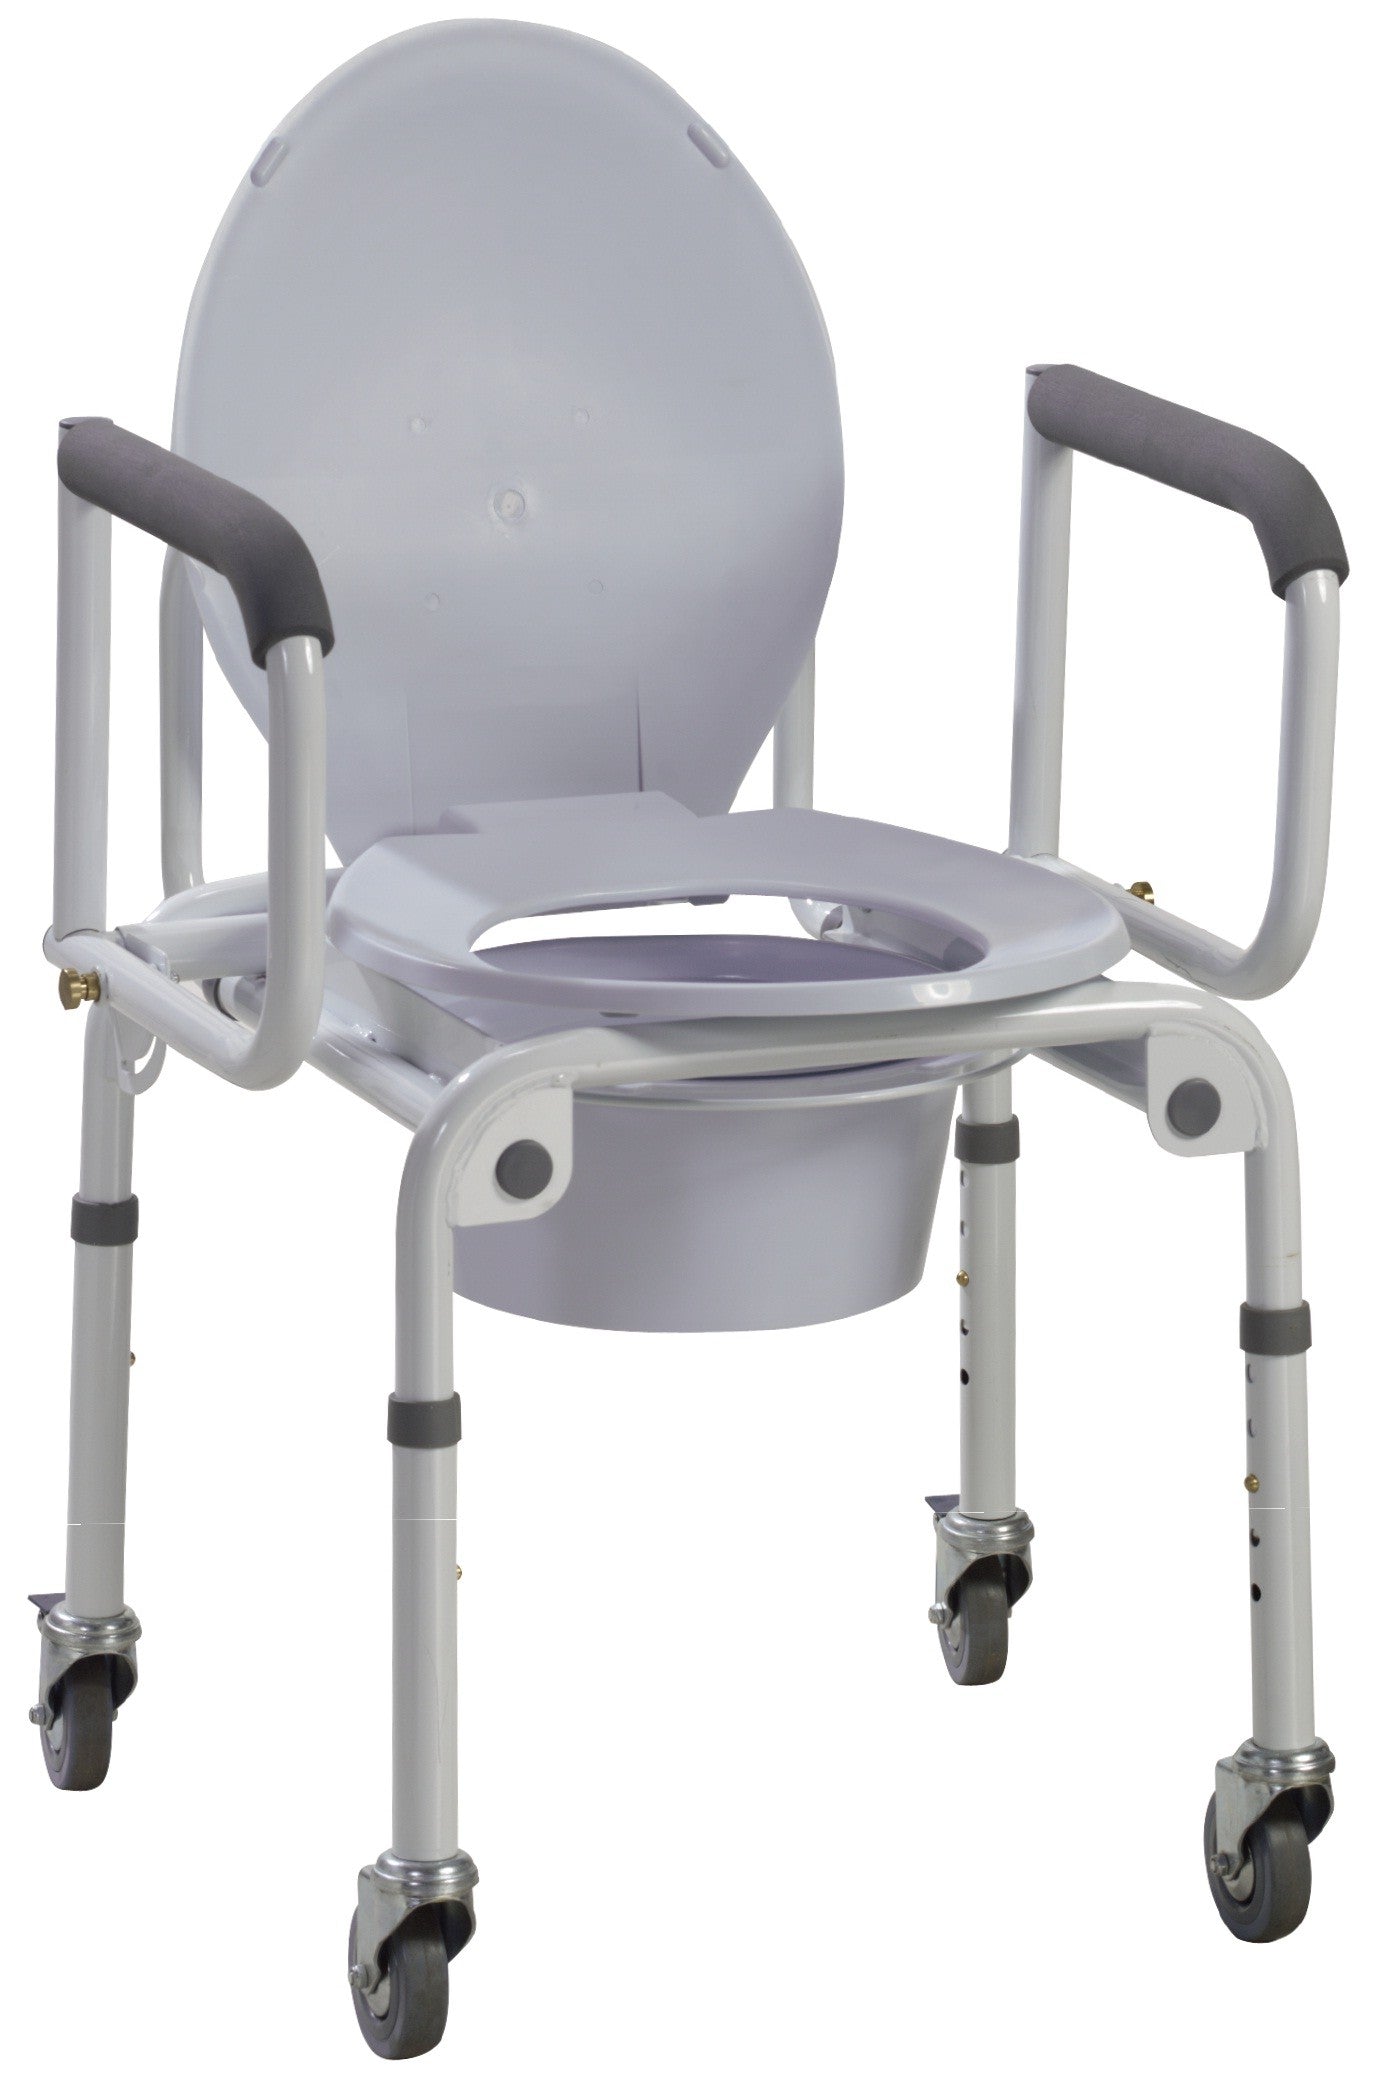 Commode Steel Drop-Arm Wheels and Padded Armrests